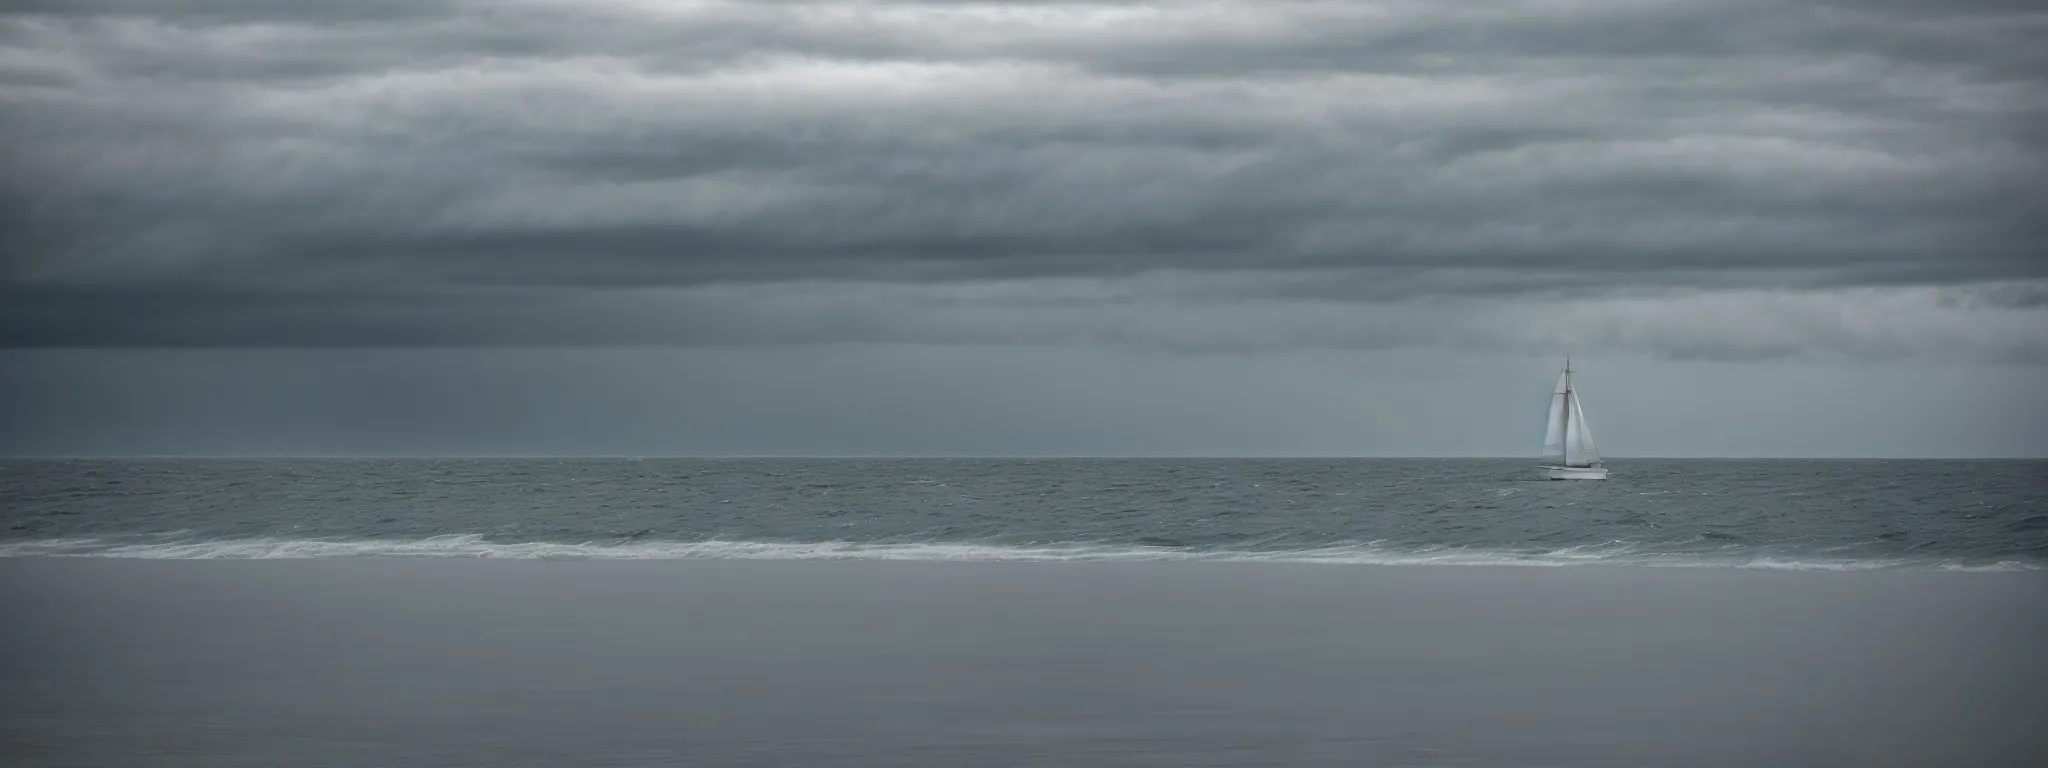 A Solitary Sailboat Sits Motionless Amidst A Vast, Still Ocean Under A Cloudy Sky.